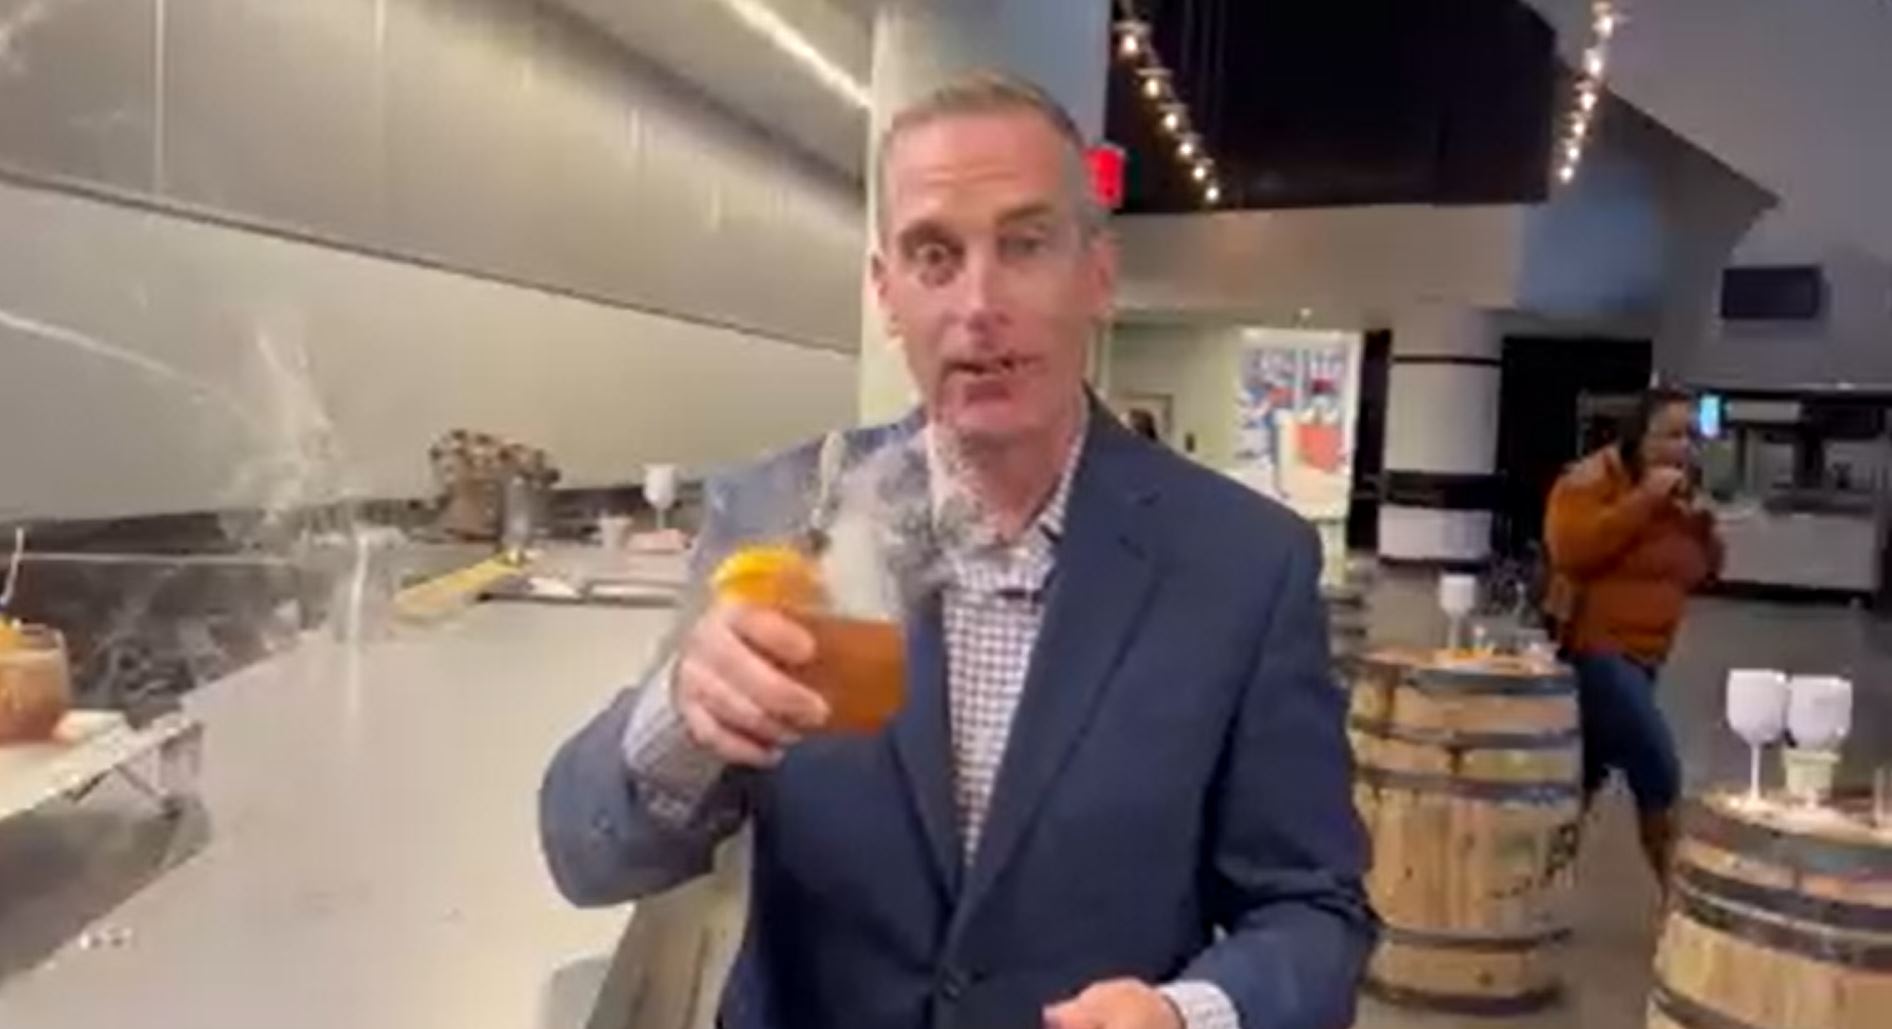 News 12's Kevin Maher checks out the new food and beverage items at UBS  Arena ahead of NHL season